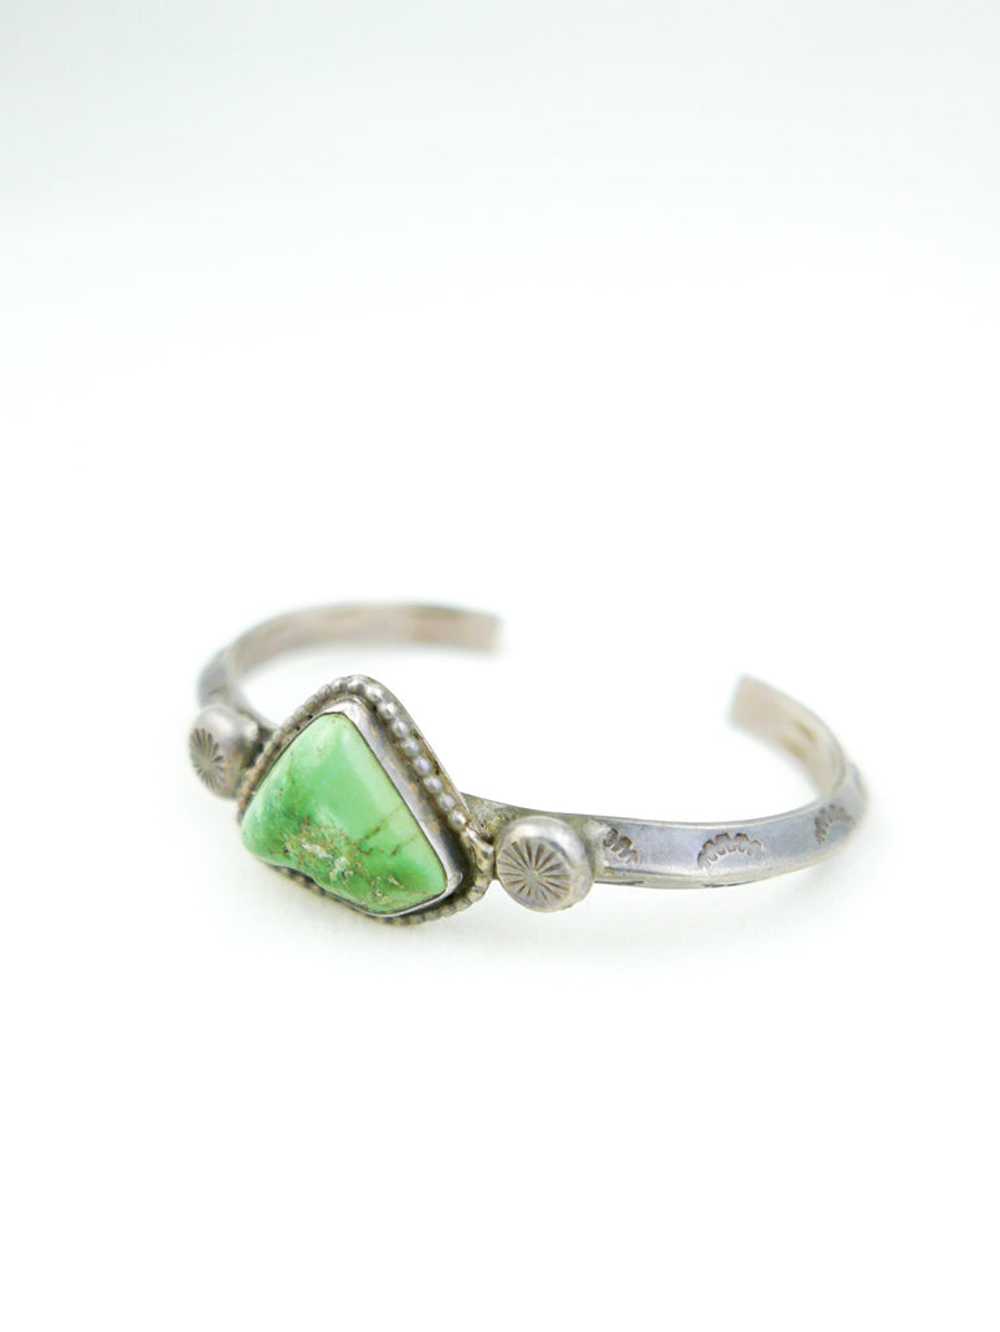 Green Turquoise Cuff - image 2